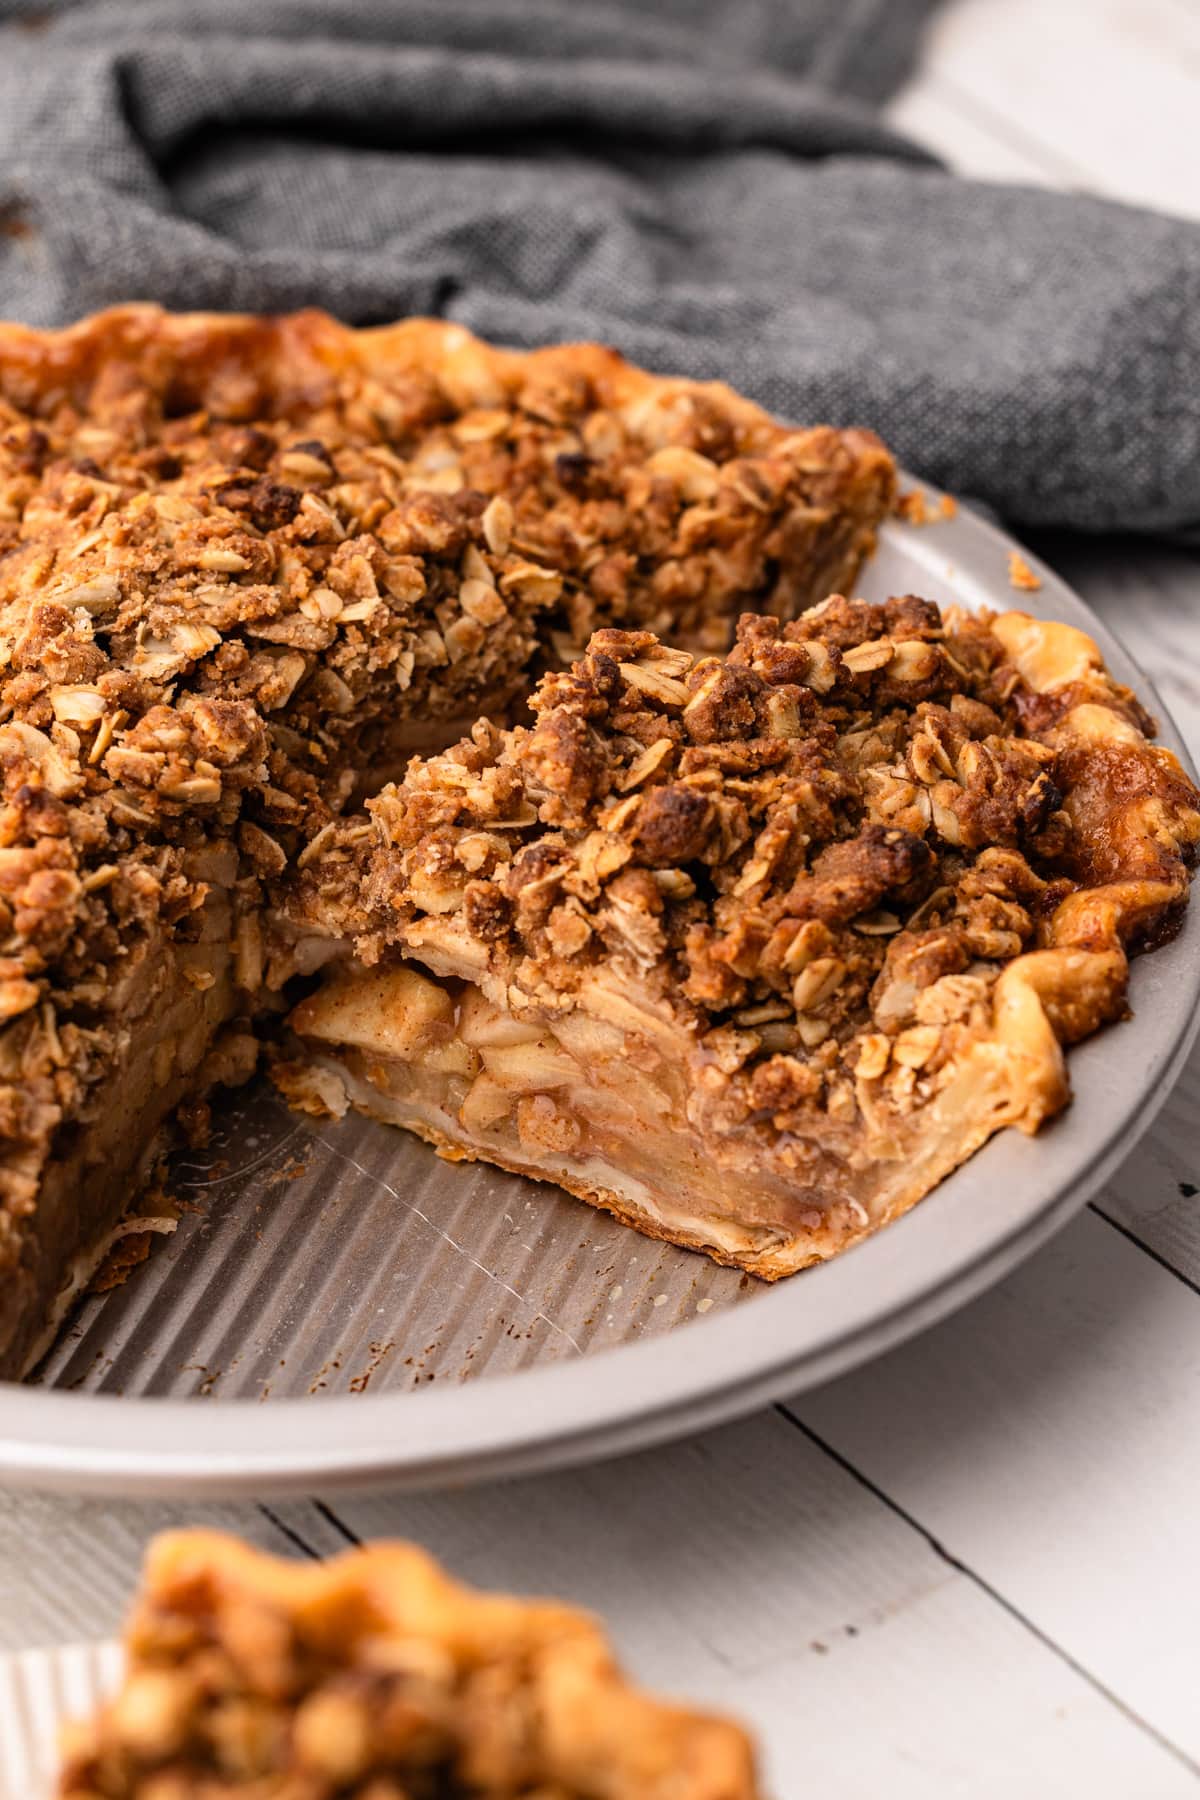 An apple crumb pie being served from the metal pie tin.